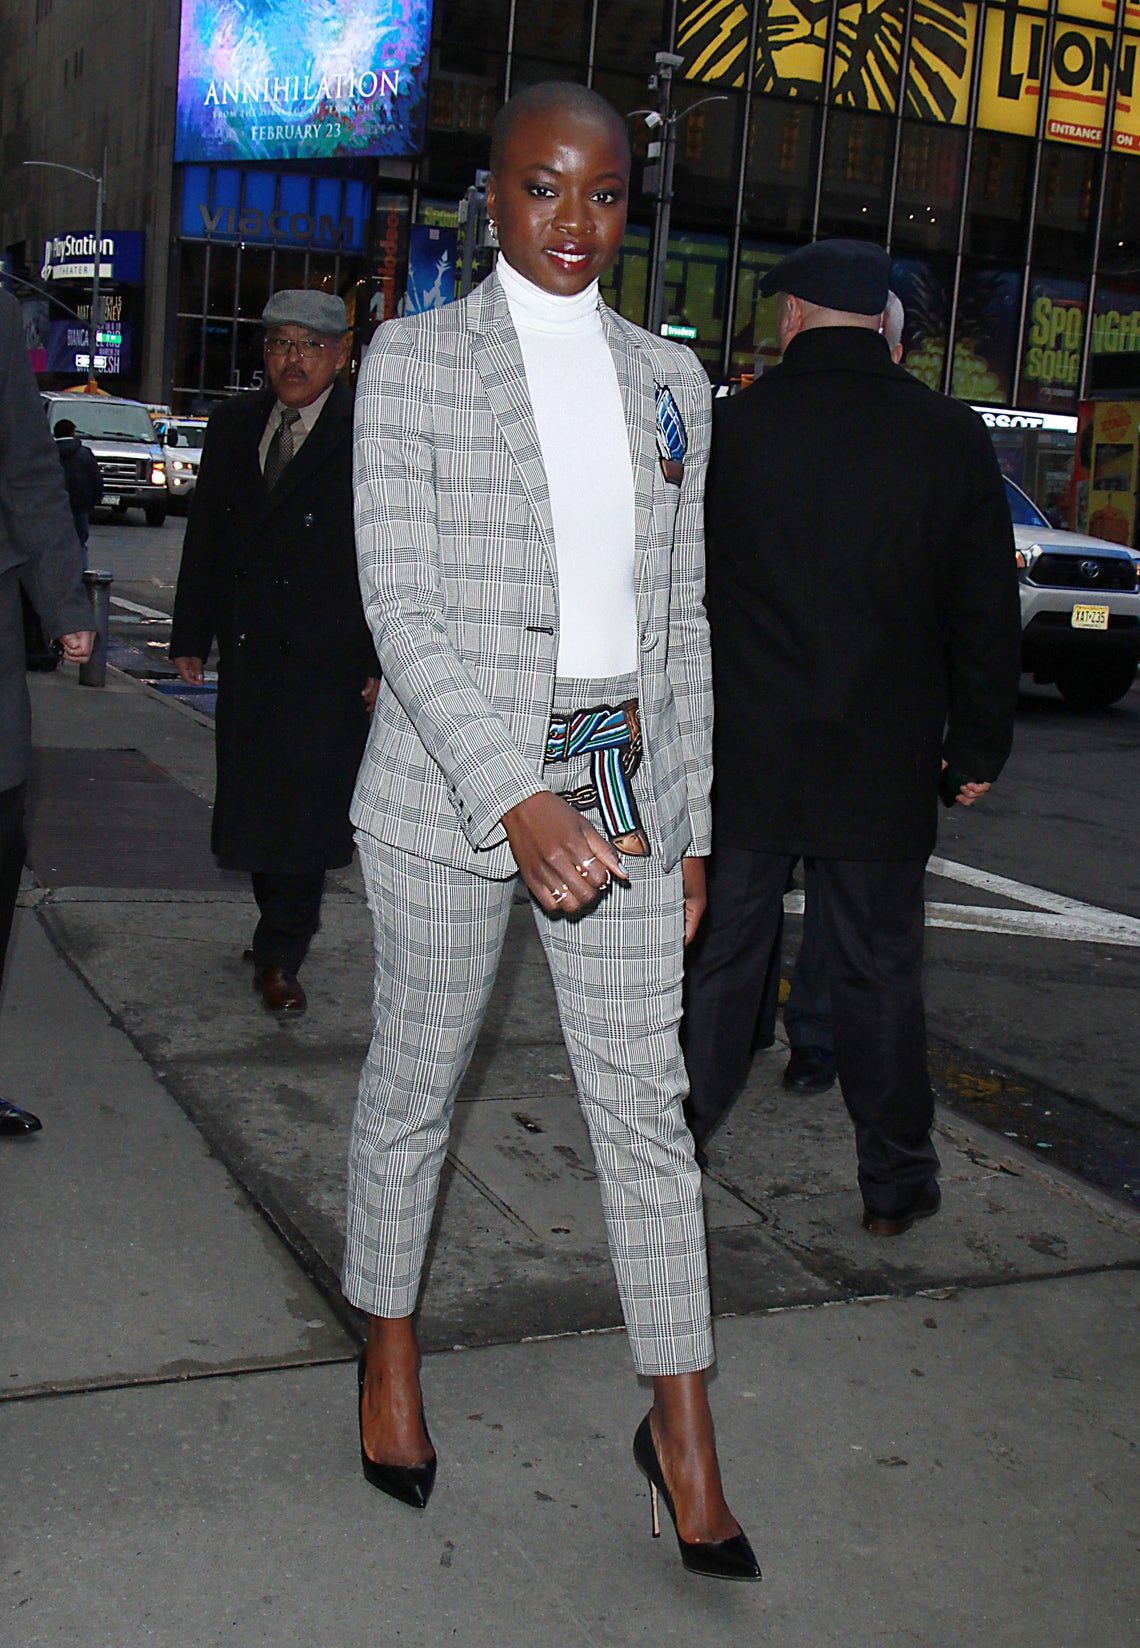 Friday Fits: The Best Celebrity Fashion of the Week